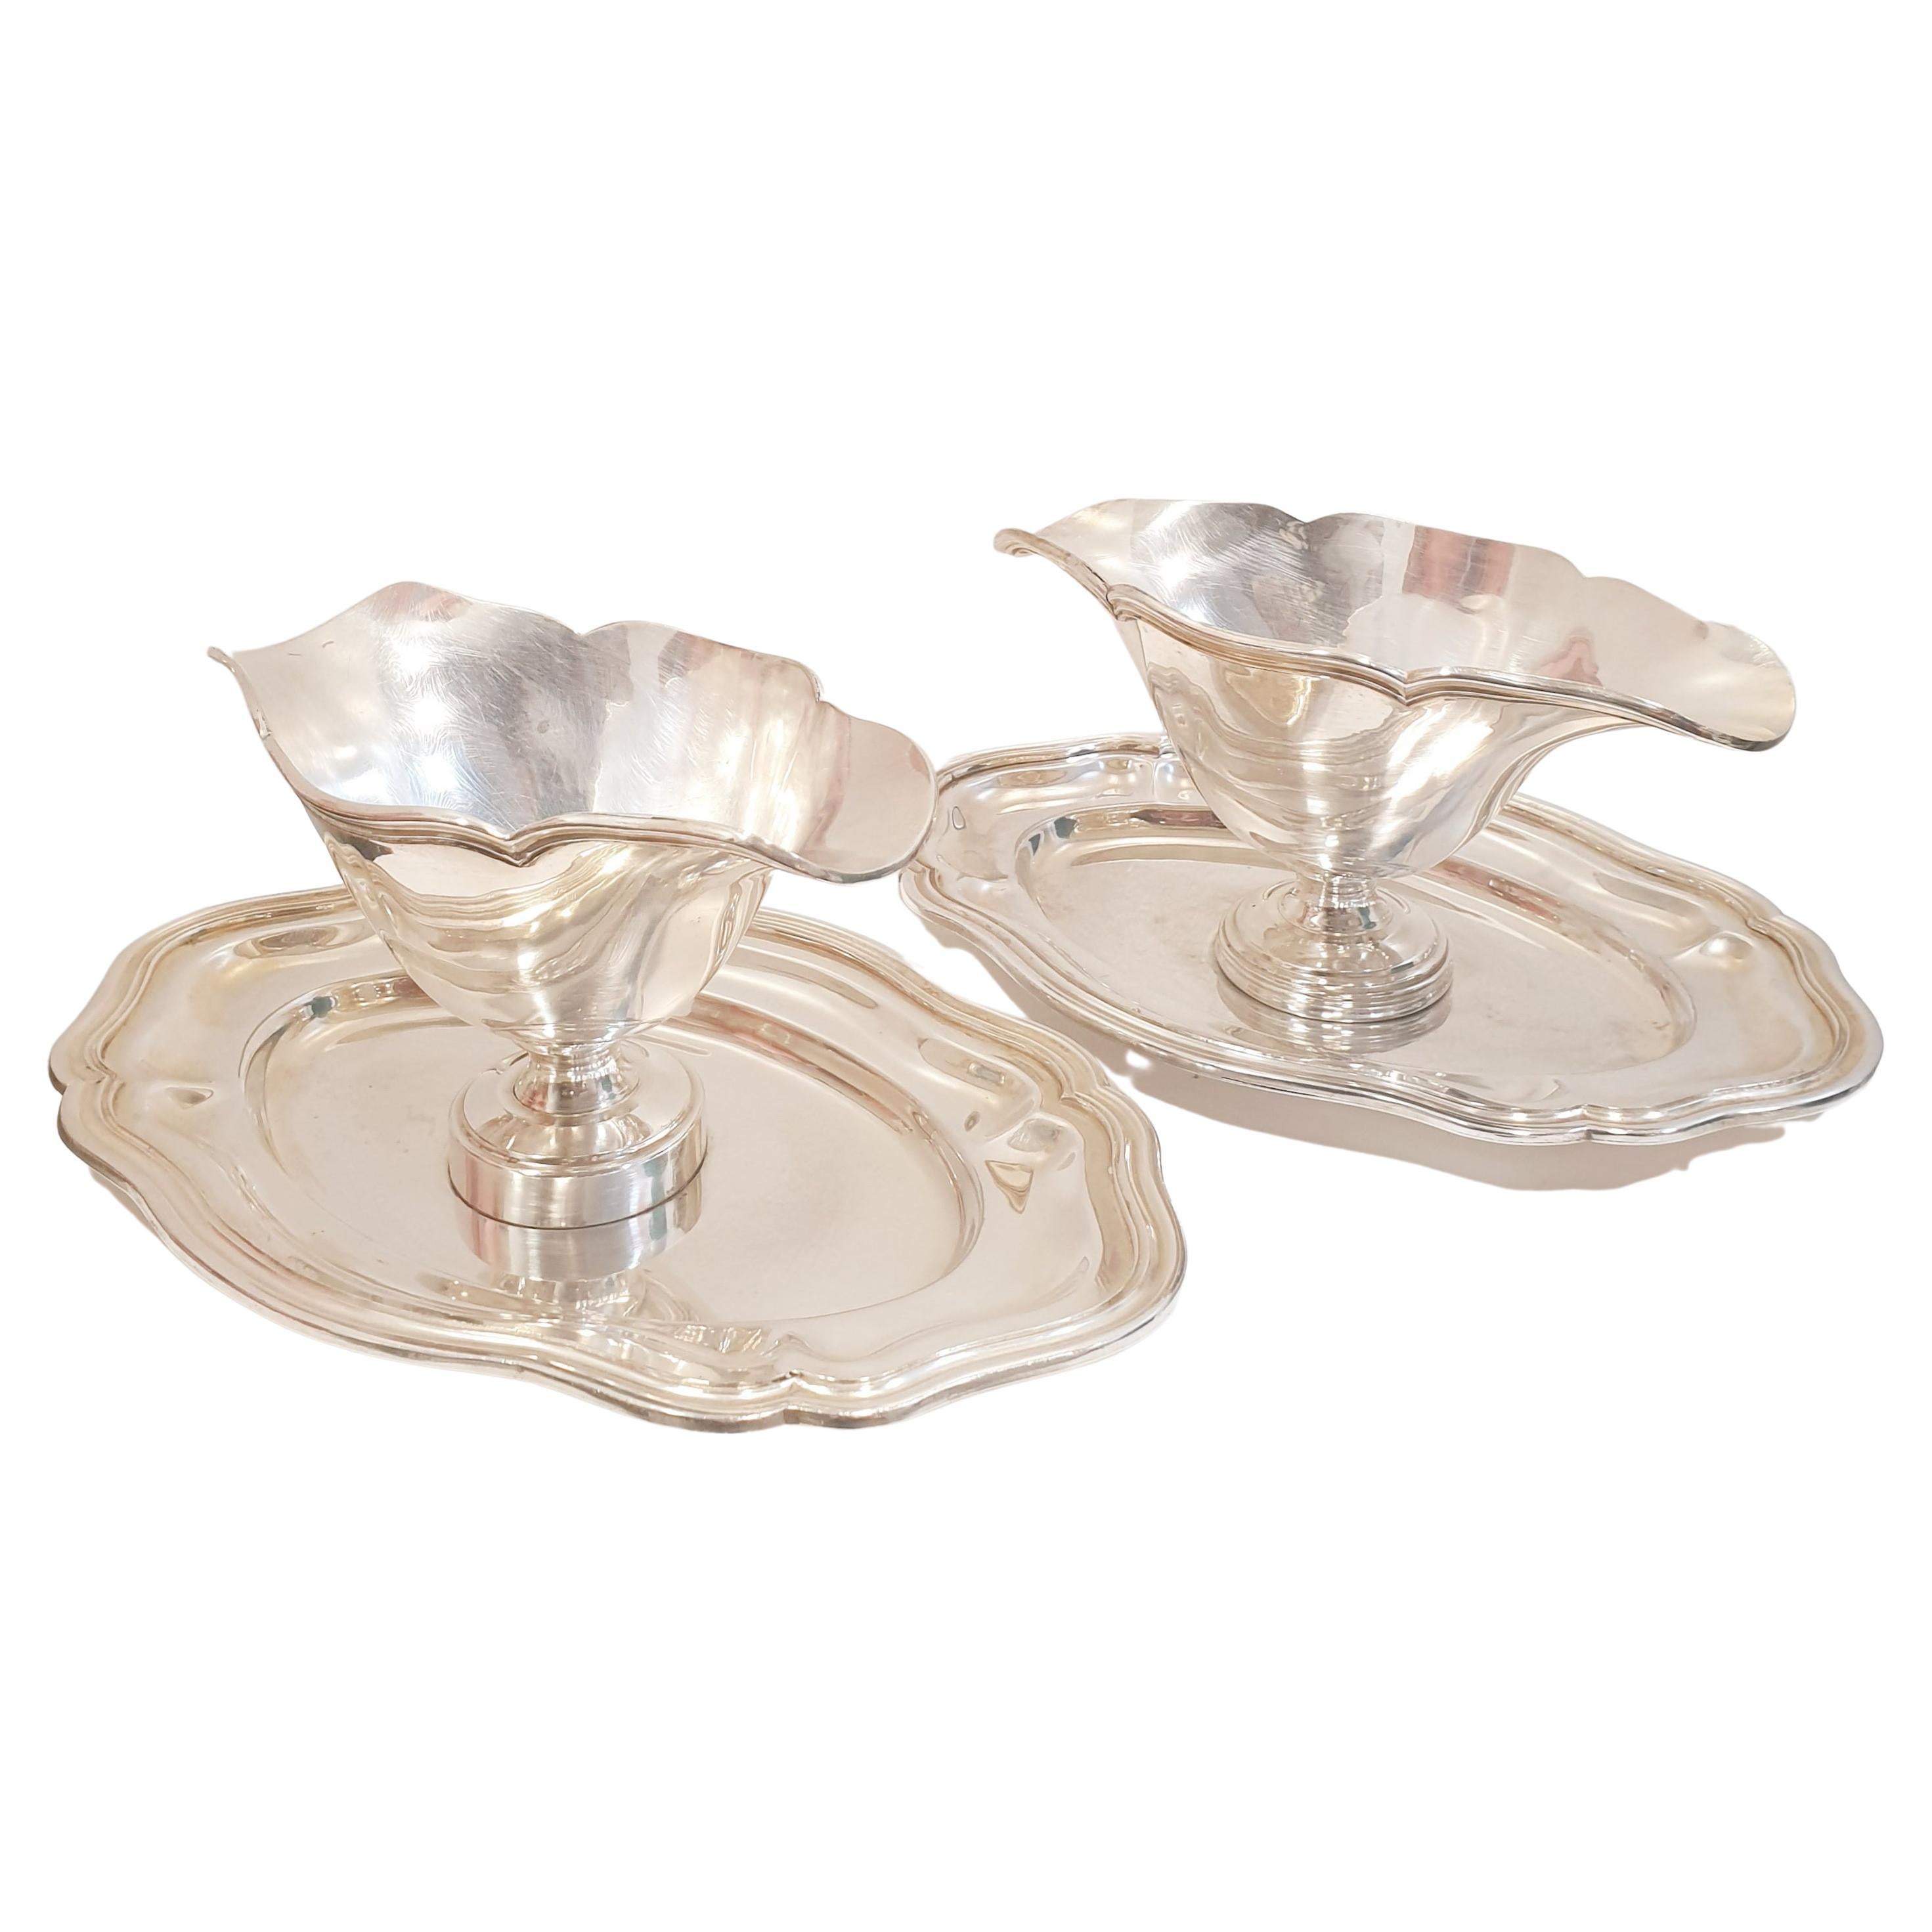 Set of 2 Antique Silver Sauce Boats from the 19th Century For Sale